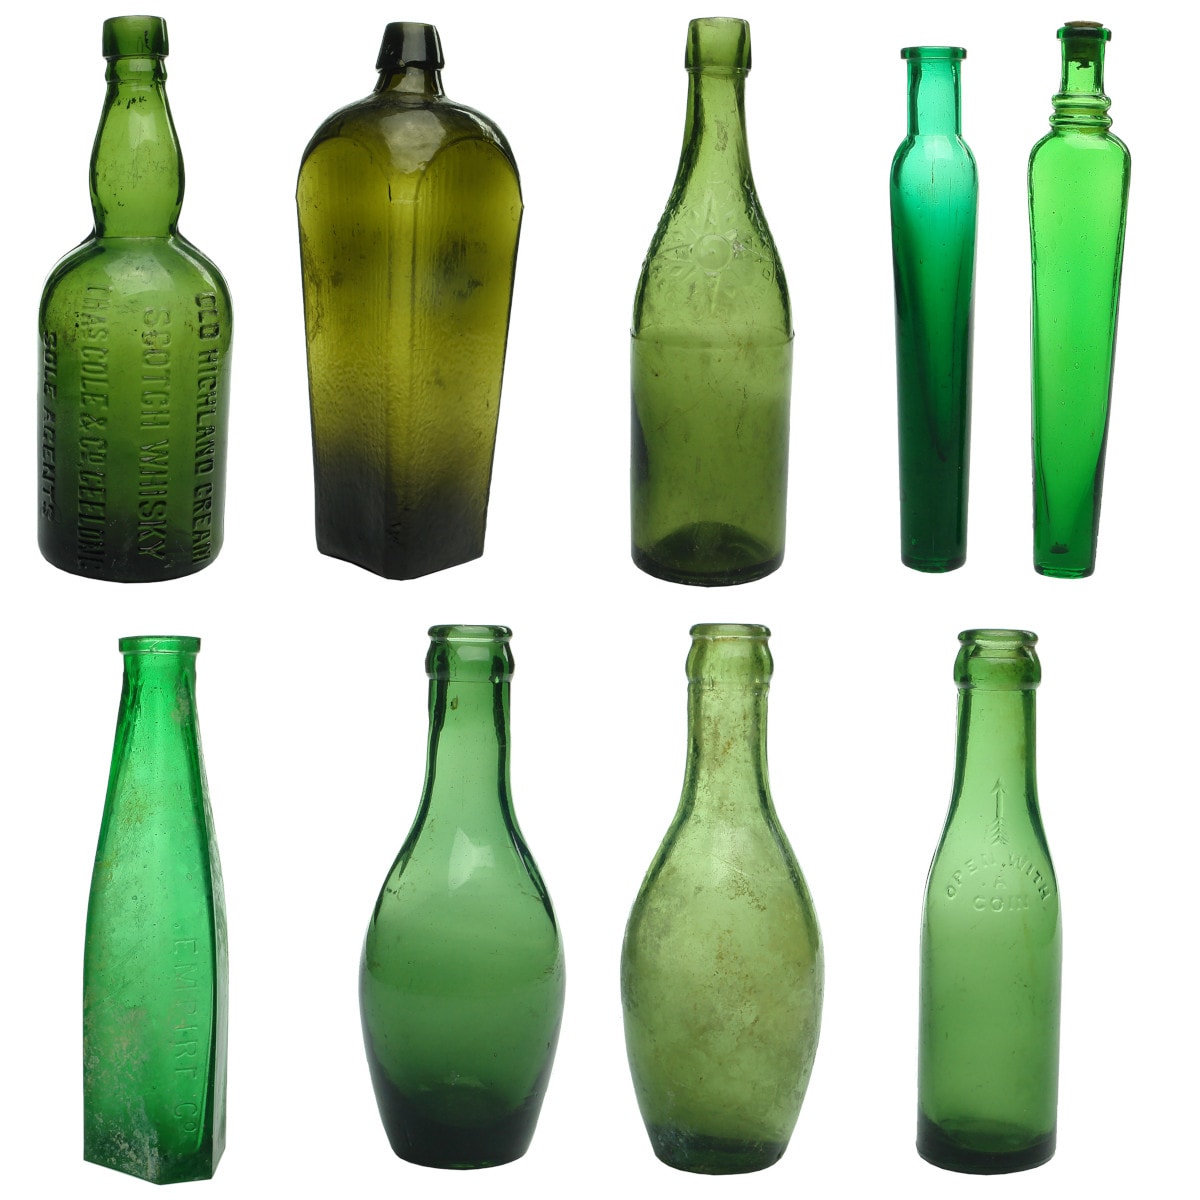 9 Green Bottles. Chas Cole Whisky; Gin; Compass Beer; Lavender Waters; Empire Co; Skittles; Open with a coin crown seal.